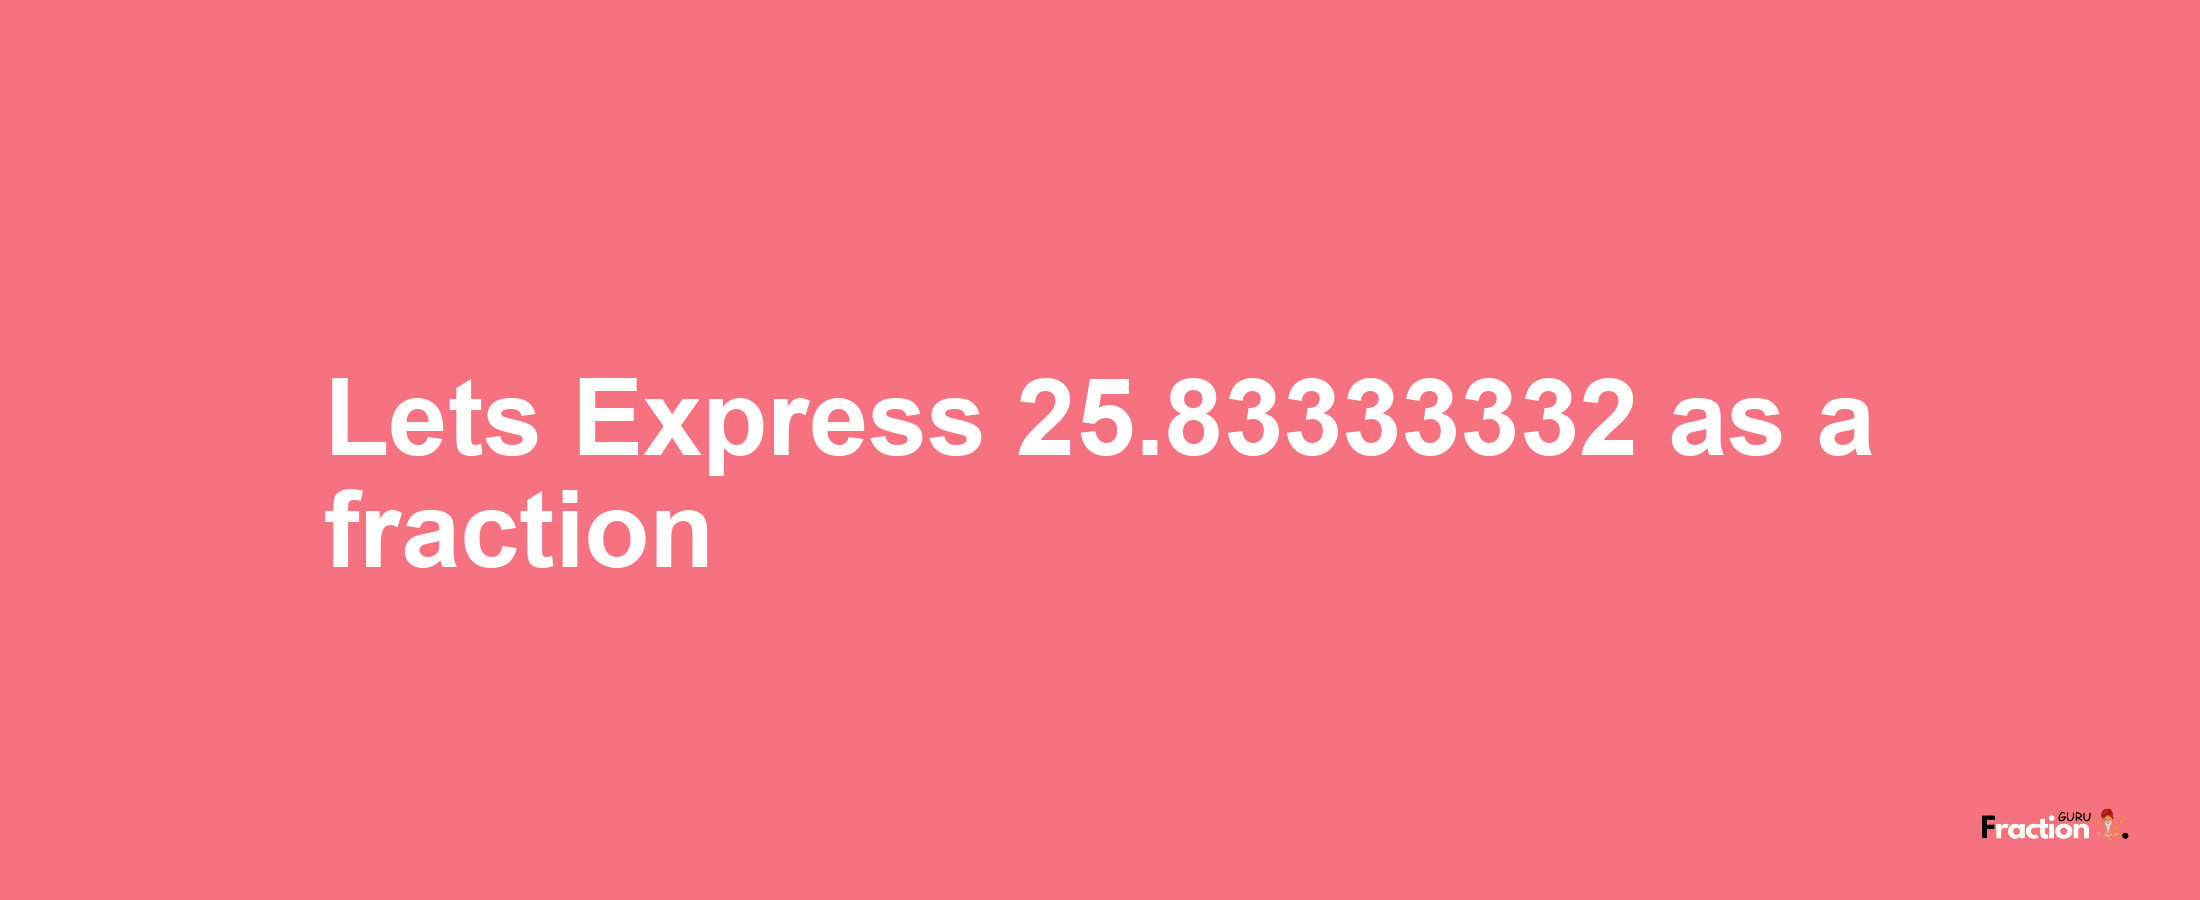 Lets Express 25.83333332 as afraction